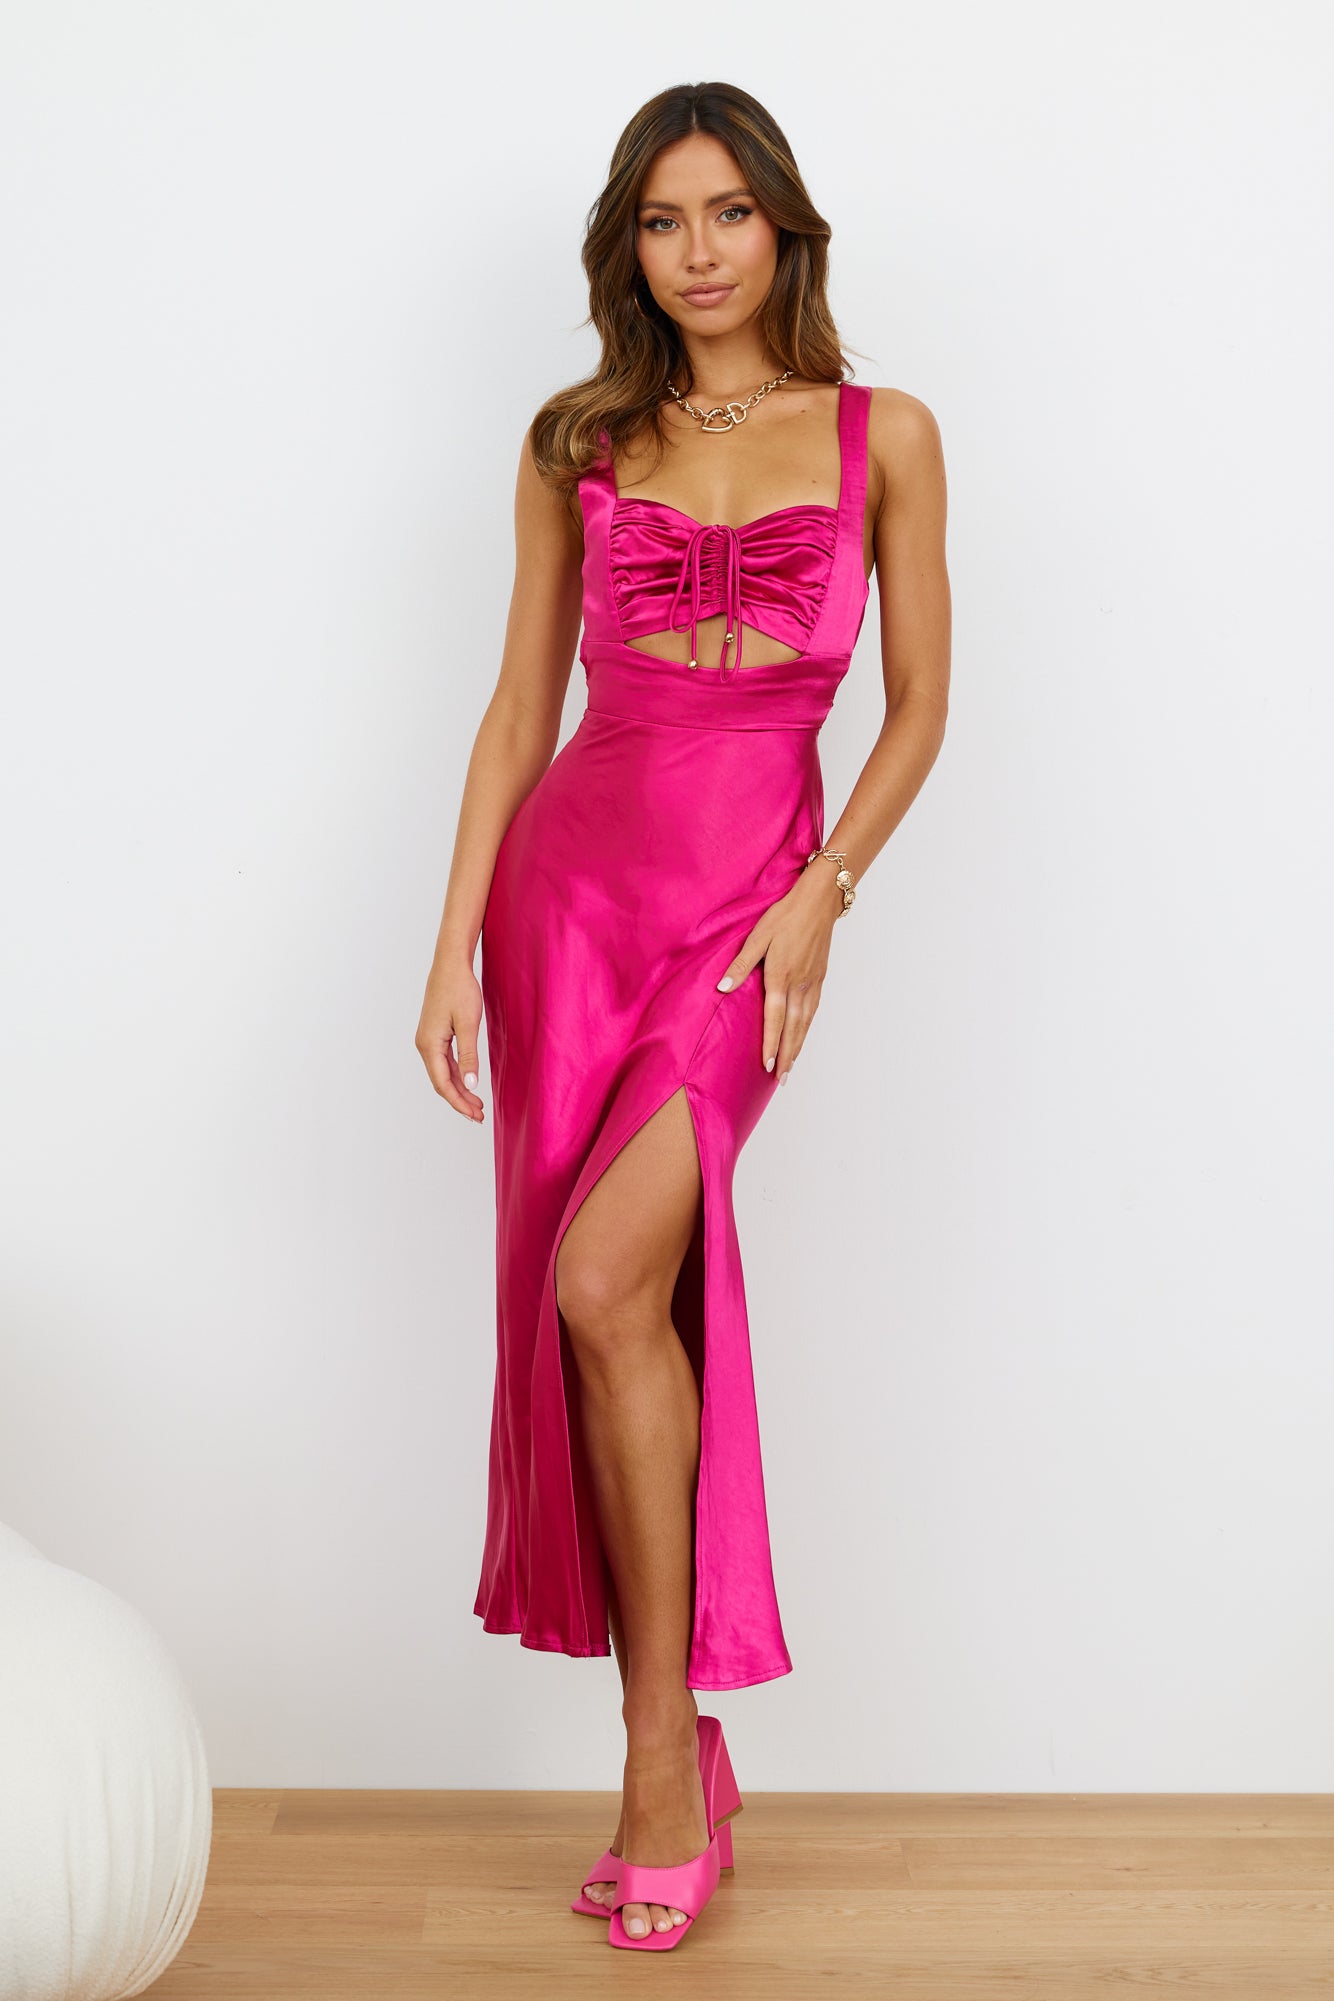 How Bout You Midi Dress Hot Pink